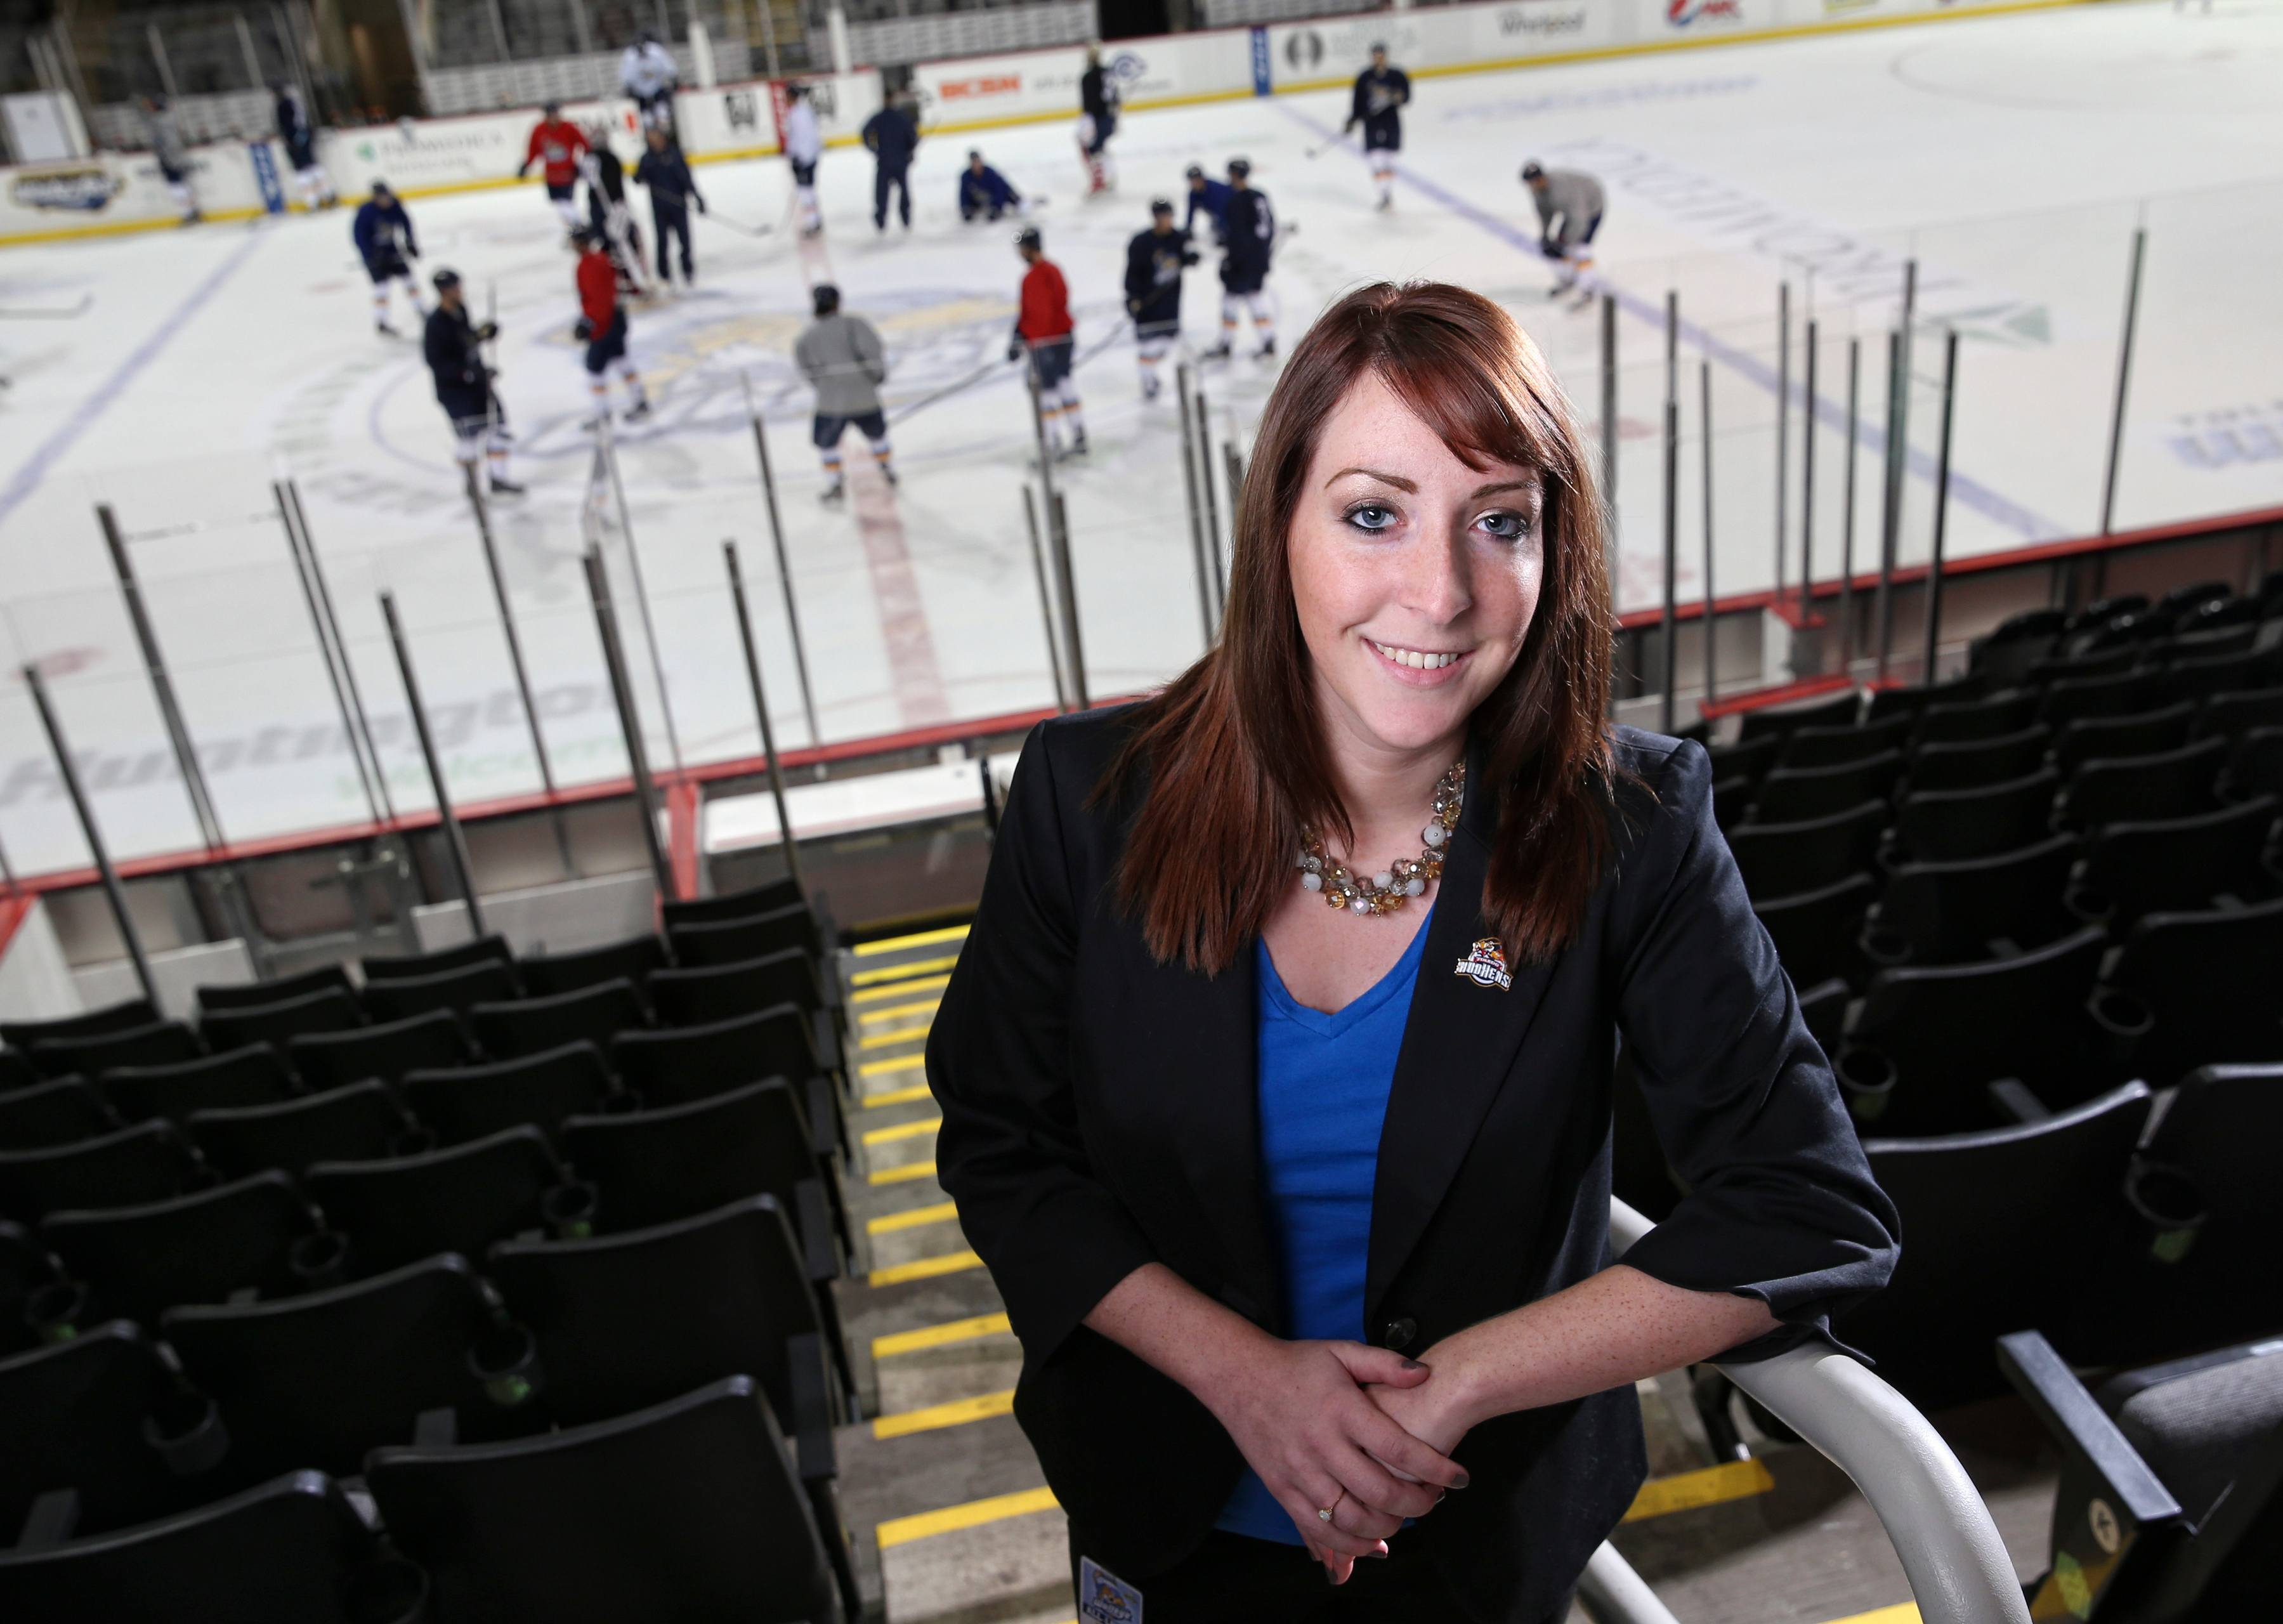 A woman in the BGSU sport administration master's program stands in the bleachers of a hockey rink as players practice on the rink behind her.